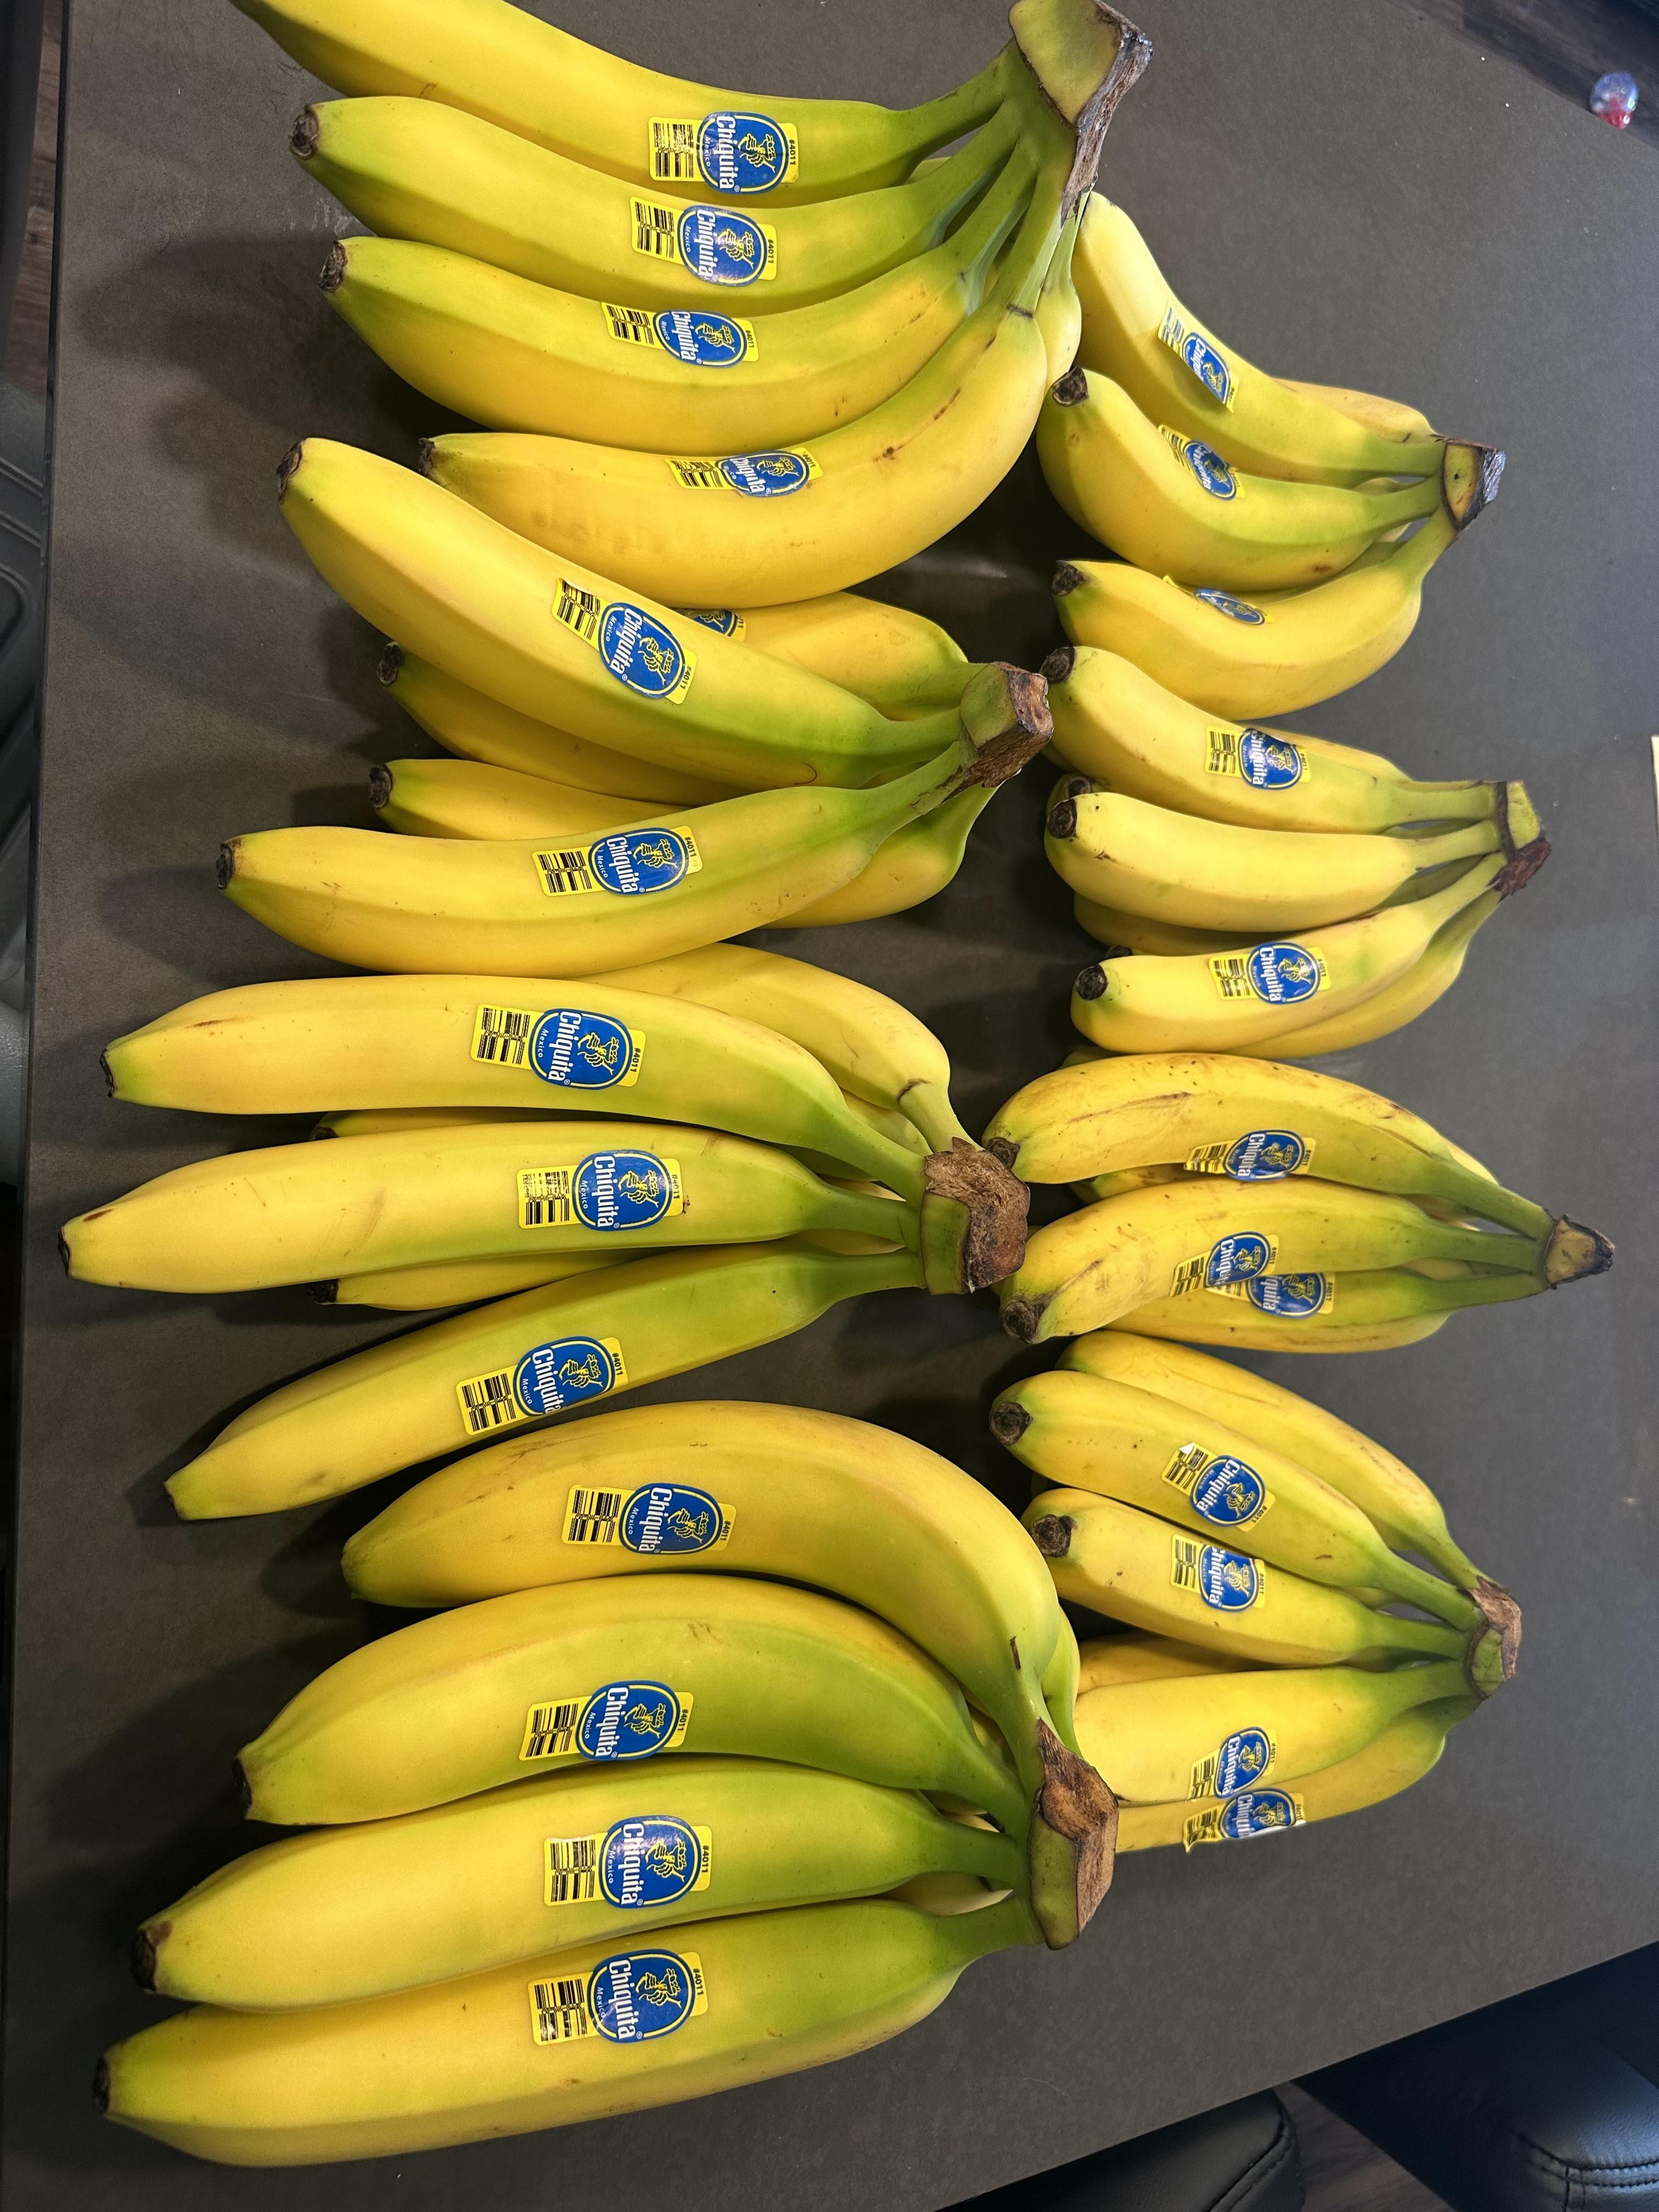 I requested 8 bananas in my weekly grocery pickup order…. They gave me 8 BUNCHES, and managed to only charge me $0.68 - the price of one single banana